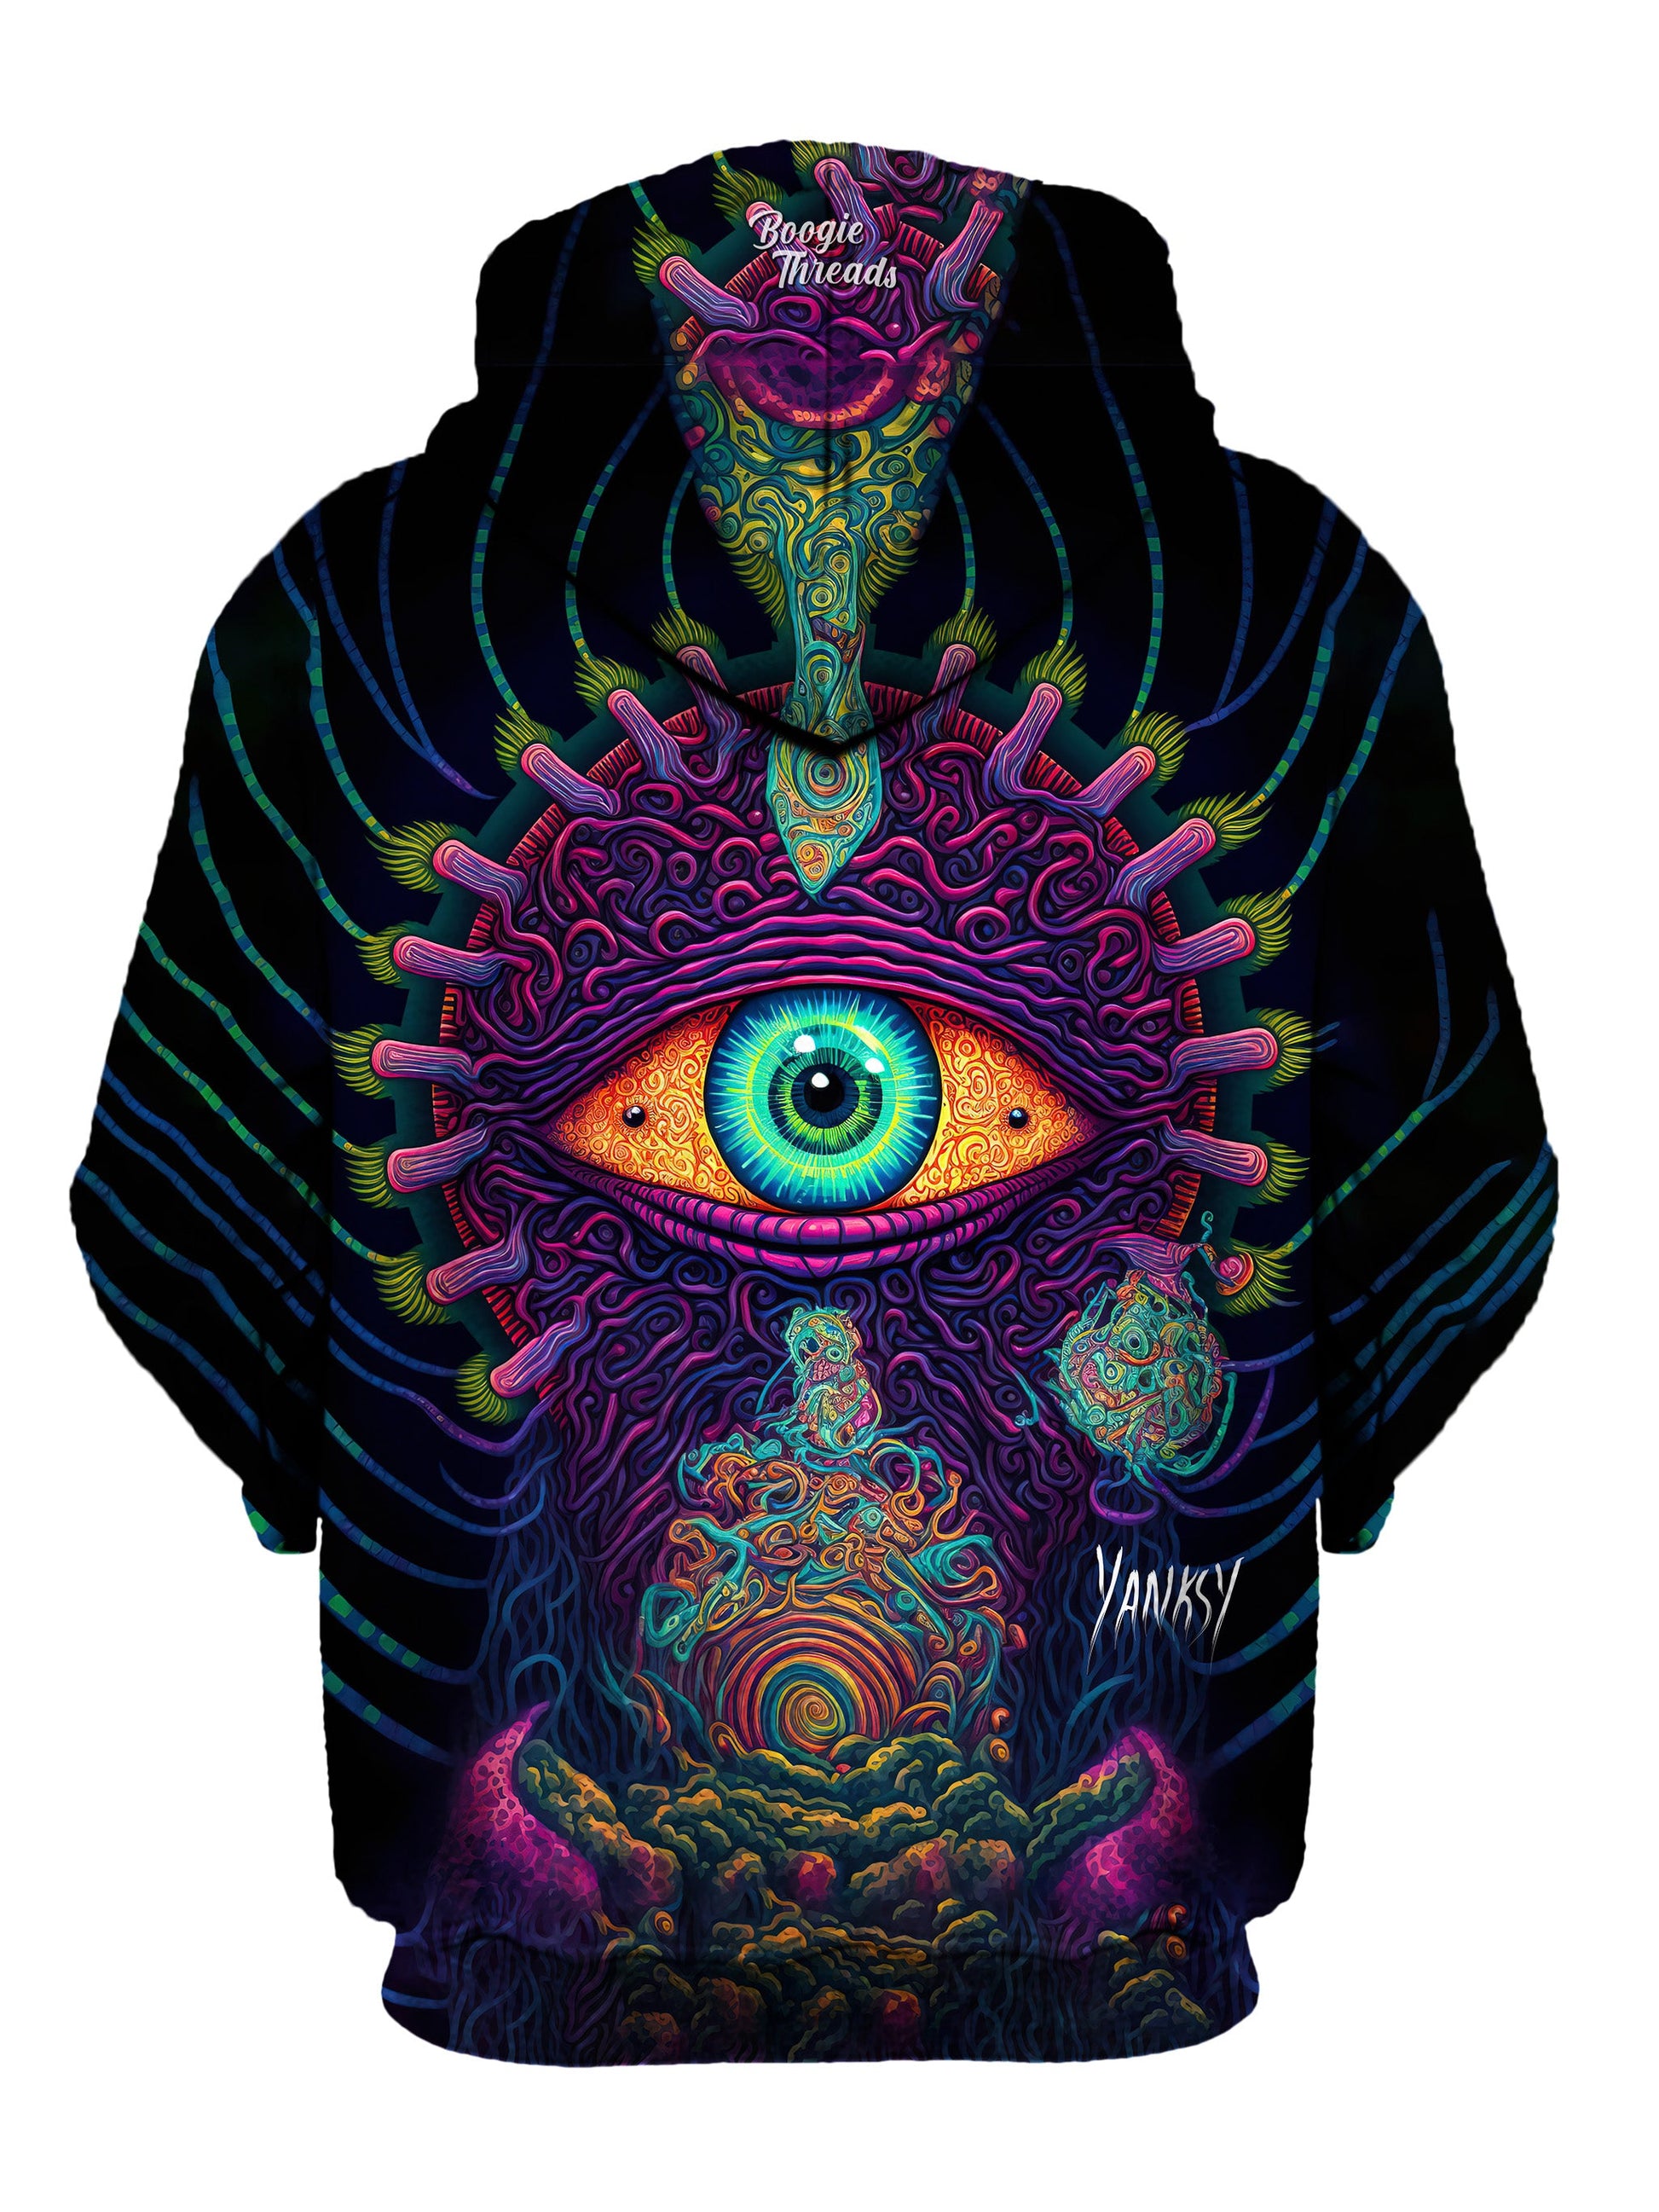 Experience ultimate comfort and style at festivals and raves with this pullover hoodie